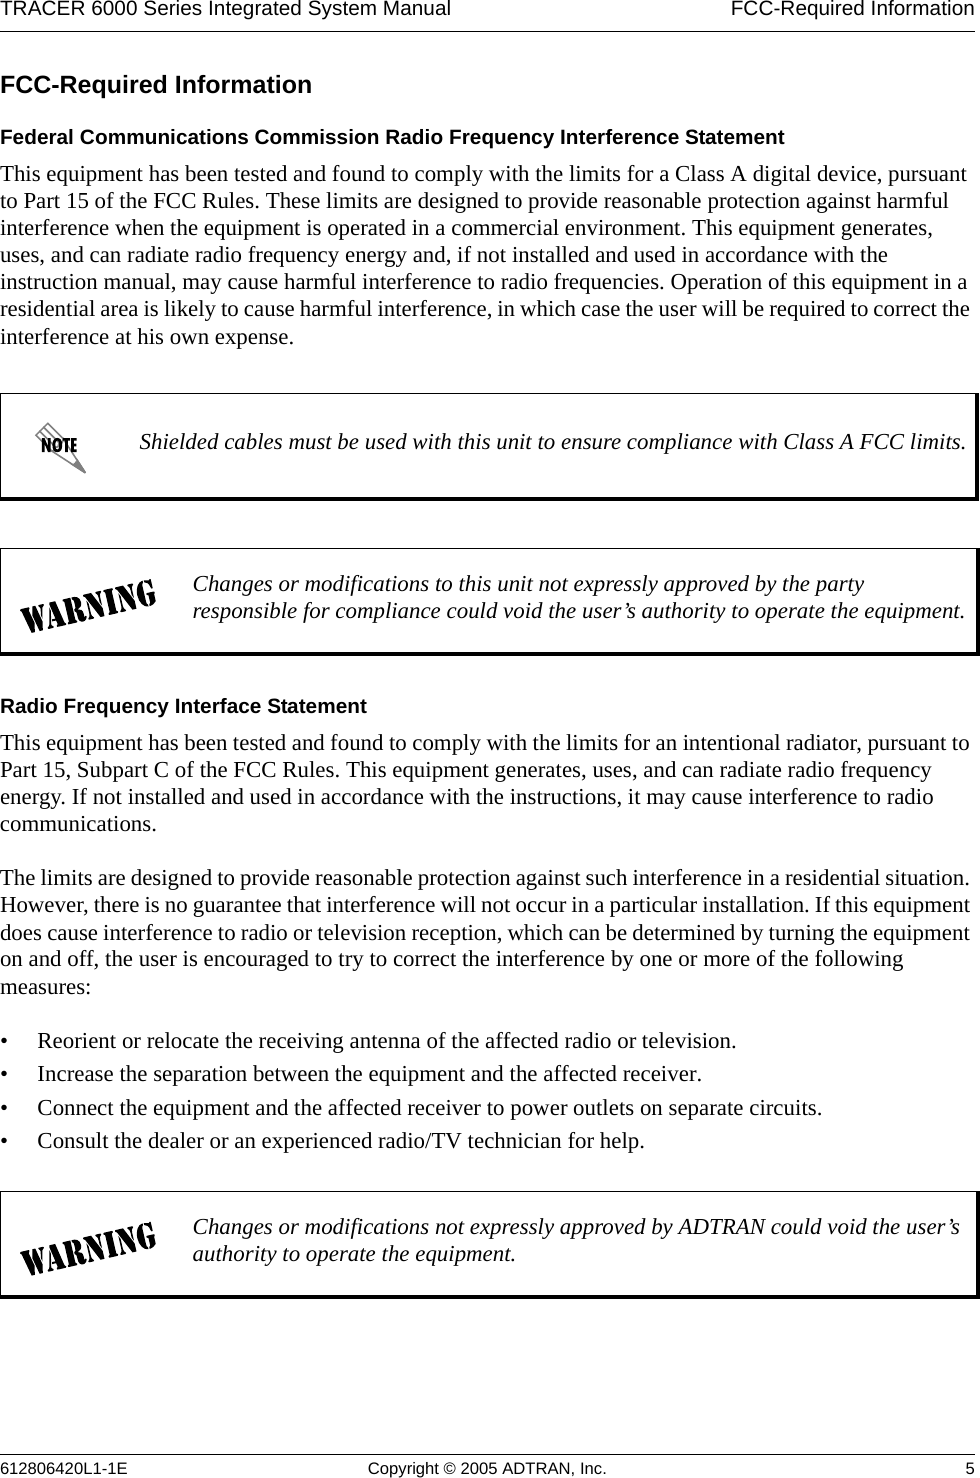 TRACER 6000 Series Integrated System Manual  FCC-Required Information612806420L1-1E Copyright © 2005 ADTRAN, Inc. 5FCC-Required InformationFederal Communications Commission Radio Frequency Interference StatementThis equipment has been tested and found to comply with the limits for a Class A digital device, pursuant to Part 15 of the FCC Rules. These limits are designed to provide reasonable protection against harmful interference when the equipment is operated in a commercial environment. This equipment generates, uses, and can radiate radio frequency energy and, if not installed and used in accordance with the instruction manual, may cause harmful interference to radio frequencies. Operation of this equipment in a residential area is likely to cause harmful interference, in which case the user will be required to correct the interference at his own expense.Radio Frequency Interface StatementThis equipment has been tested and found to comply with the limits for an intentional radiator, pursuant to Part 15, Subpart C of the FCC Rules. This equipment generates, uses, and can radiate radio frequency energy. If not installed and used in accordance with the instructions, it may cause interference to radio communications.The limits are designed to provide reasonable protection against such interference in a residential situation. However, there is no guarantee that interference will not occur in a particular installation. If this equipment does cause interference to radio or television reception, which can be determined by turning the equipment on and off, the user is encouraged to try to correct the interference by one or more of the following measures: • Reorient or relocate the receiving antenna of the affected radio or television.• Increase the separation between the equipment and the affected receiver.• Connect the equipment and the affected receiver to power outlets on separate circuits.• Consult the dealer or an experienced radio/TV technician for help.Shielded cables must be used with this unit to ensure compliance with Class A FCC limits.Changes or modifications to this unit not expressly approved by the party responsible for compliance could void the user’s authority to operate the equipment.Changes or modifications not expressly approved by ADTRAN could void the user’s authority to operate the equipment.